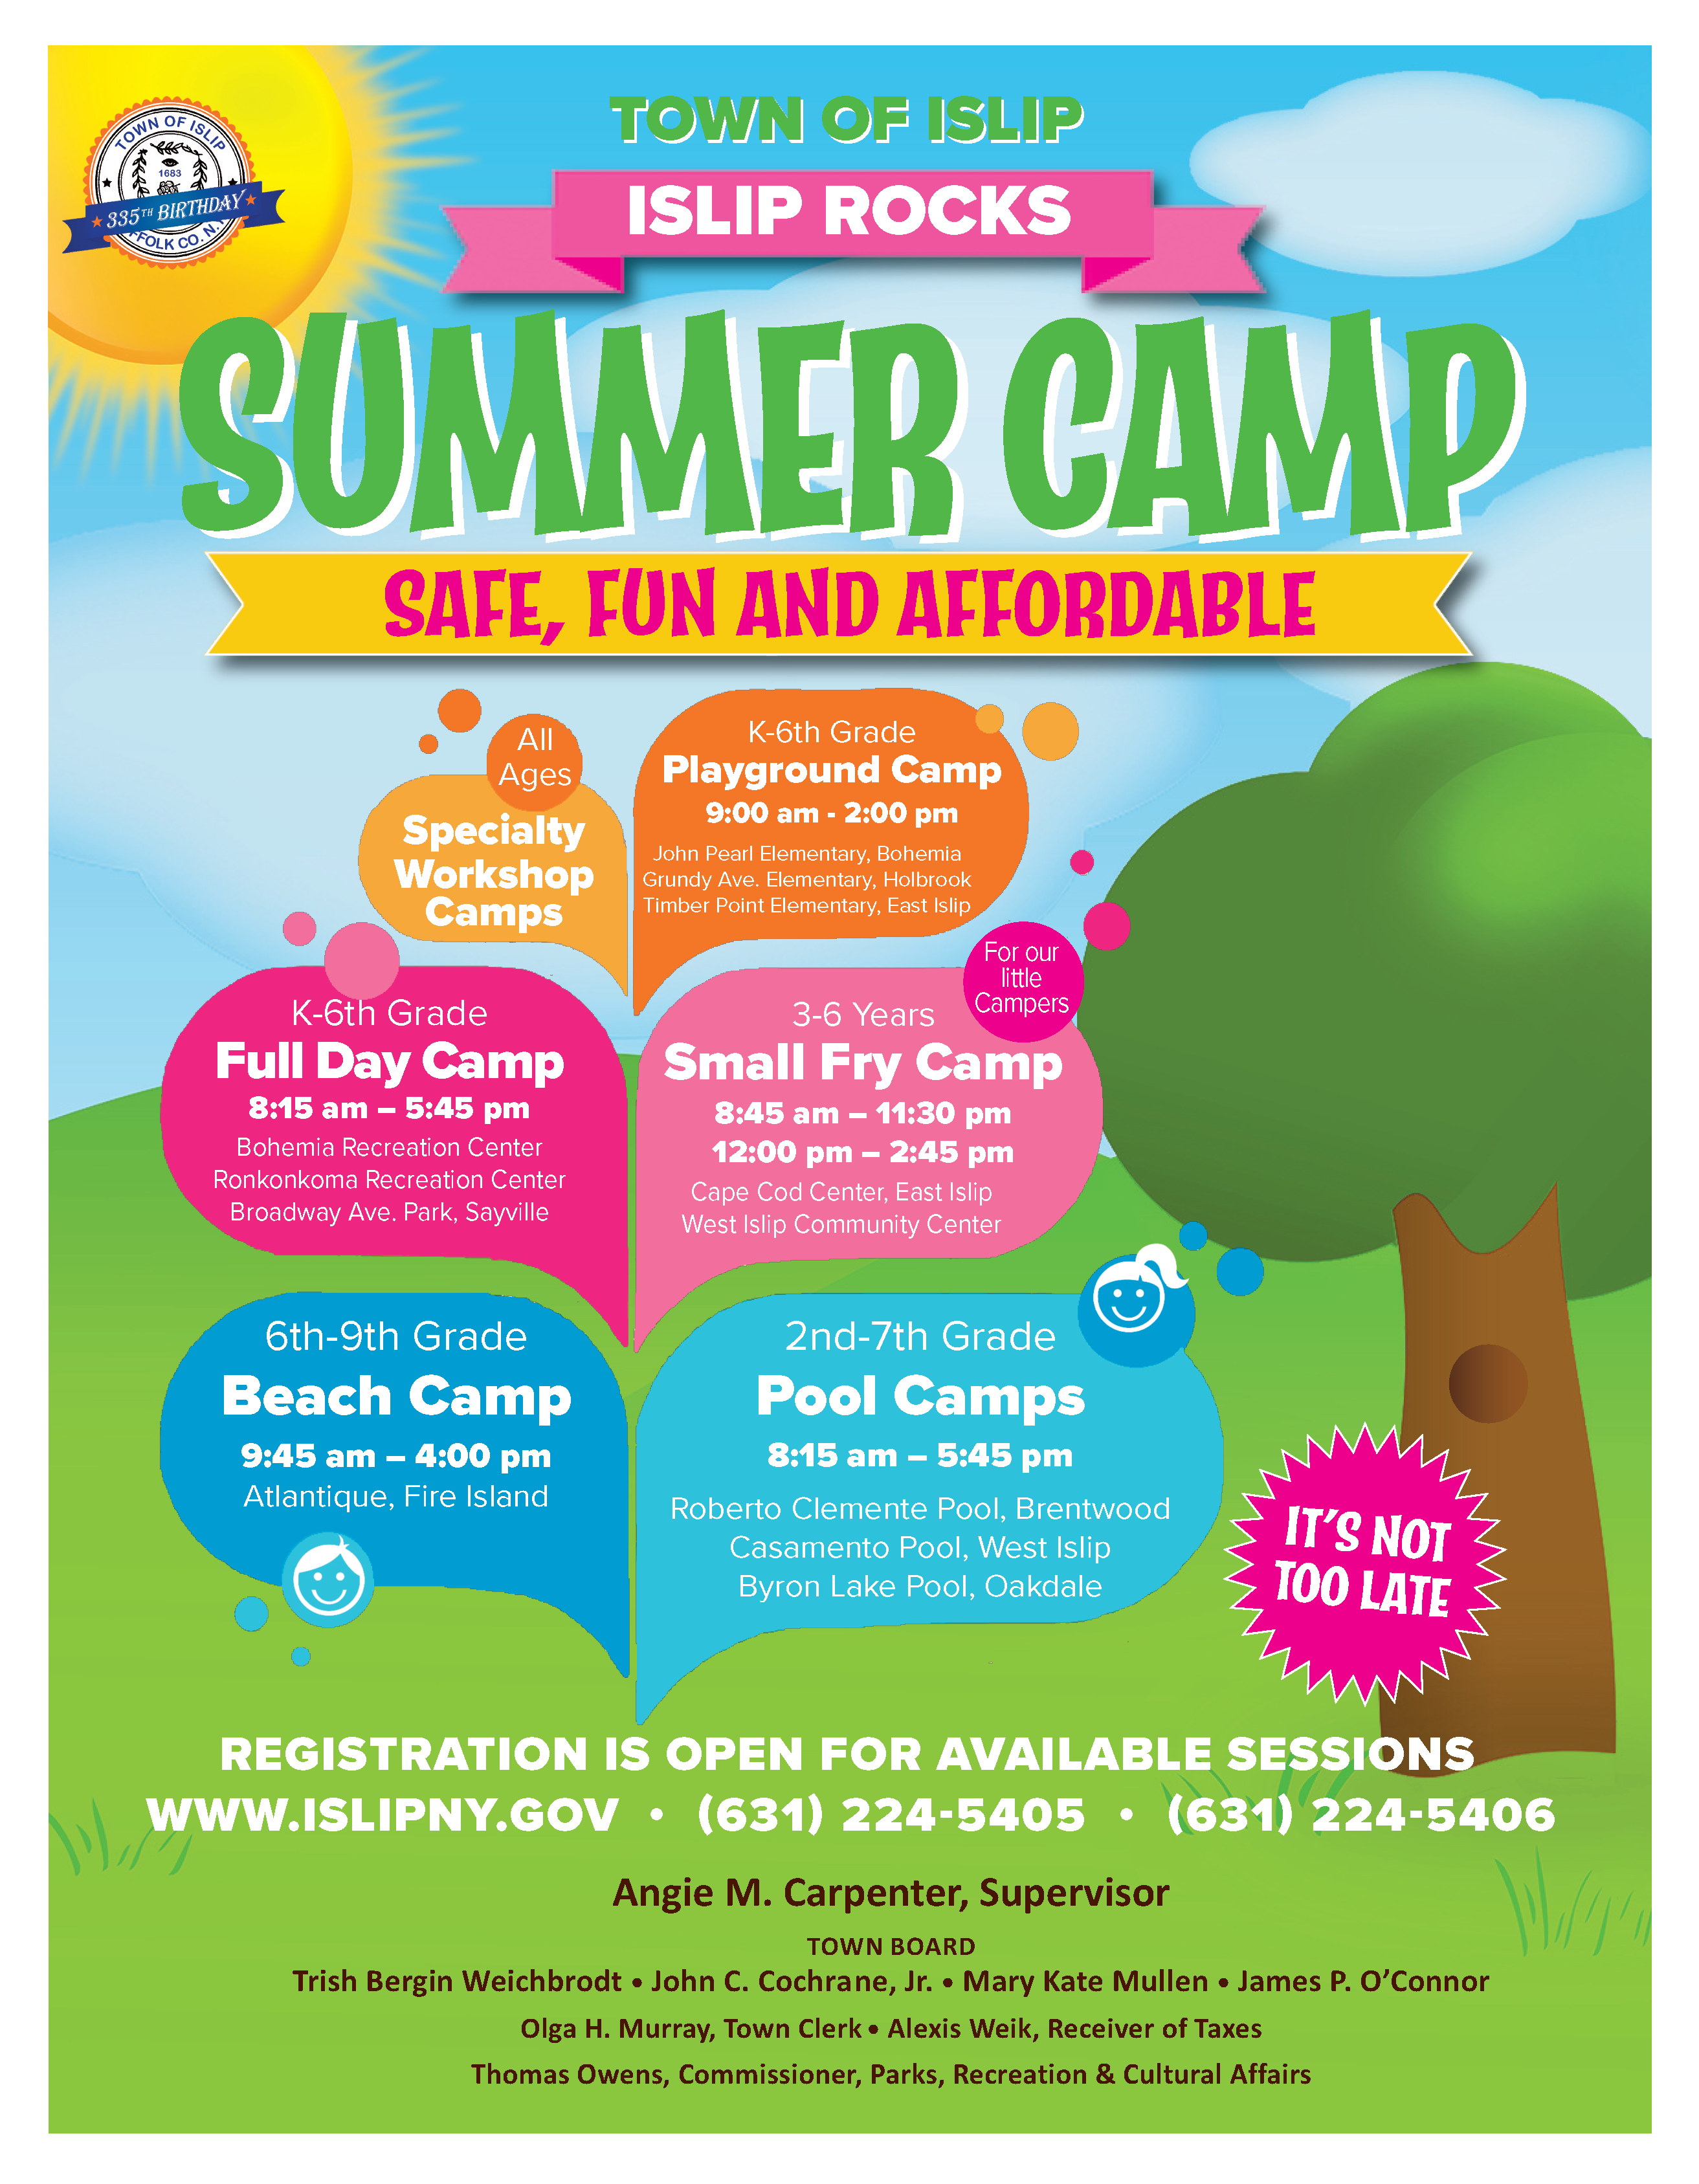 A flyer announcing safe, fun and affordable summer camps available for the 2019 year, call 631-224-5405 for more information and to register.